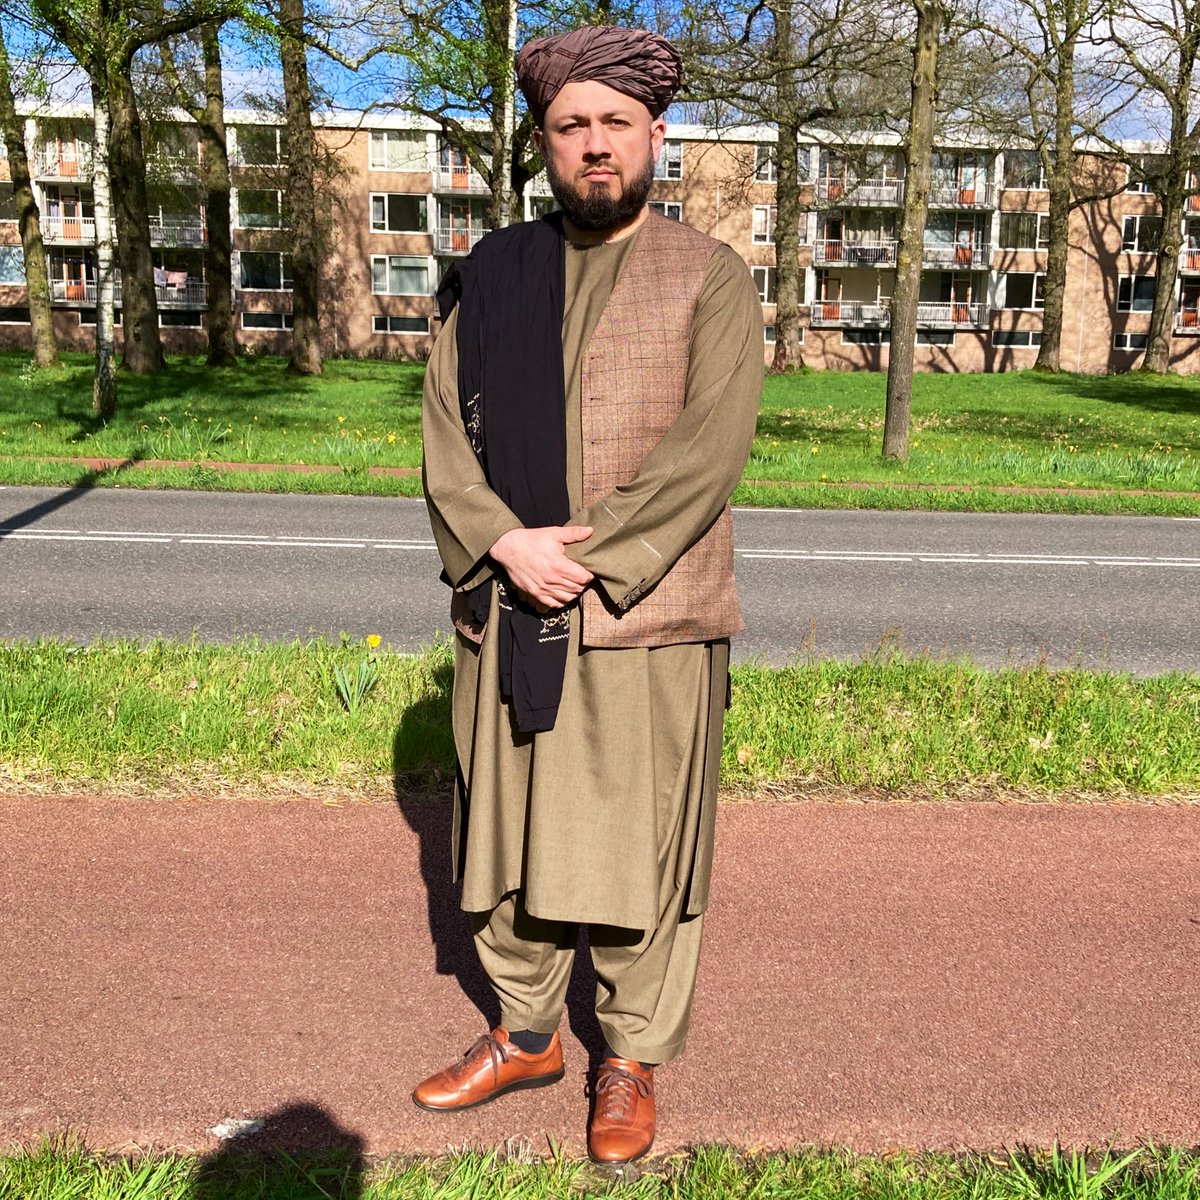 It is now exactly 30 years since I have arrived in the Netherlands as a refugee. Even after 30 years, I still see my time here as temporary. When I sort out my affairs, I wish to permanently go back to Afghanistan. This place may be great but it’s not my home and never will be.